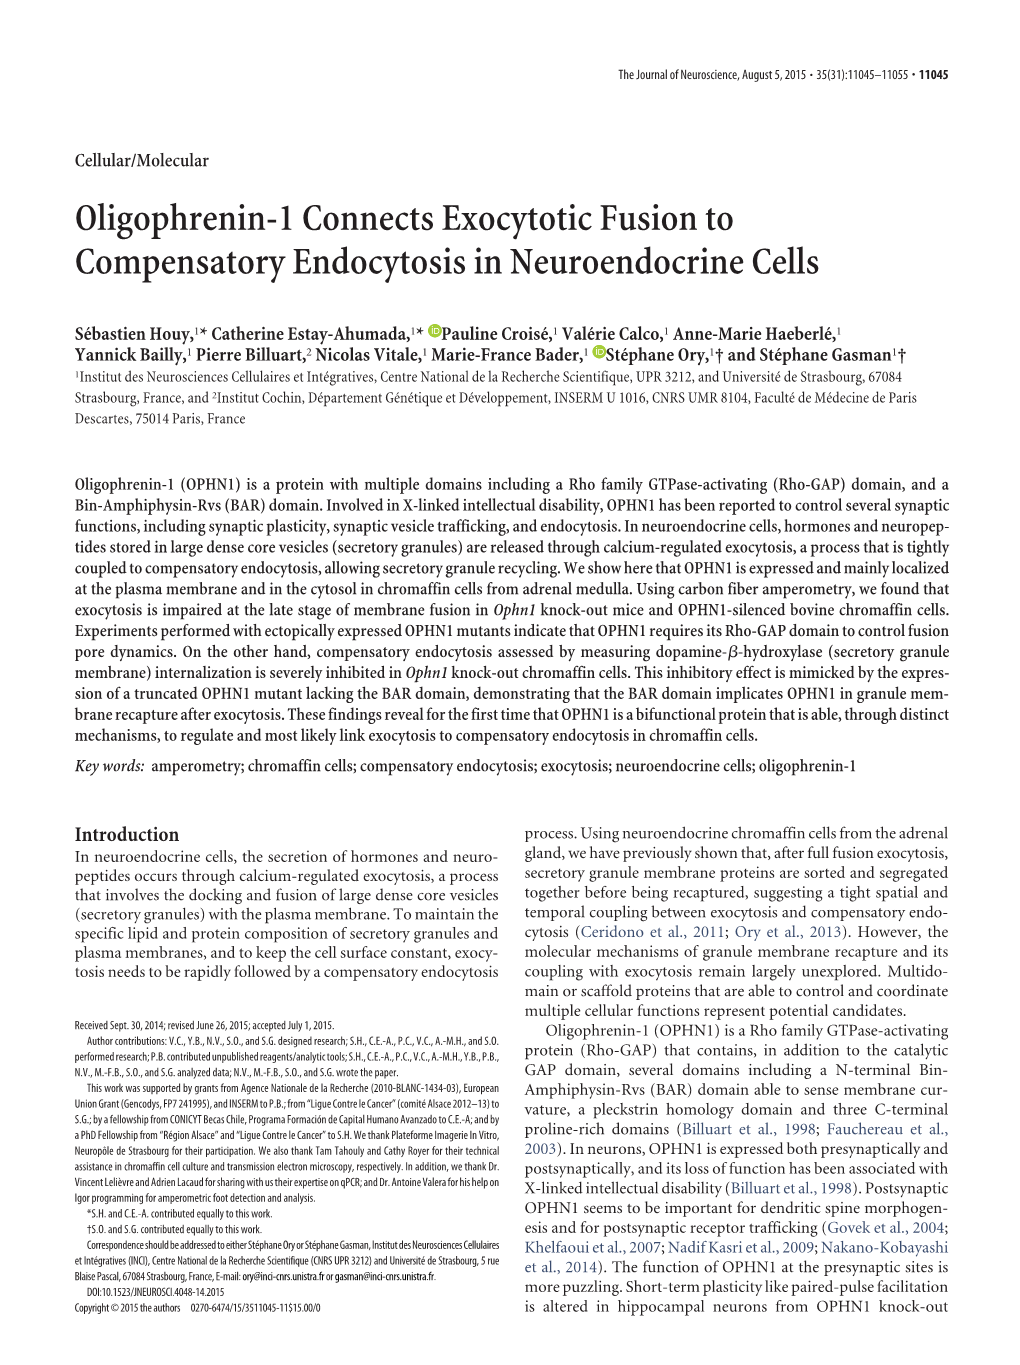 Oligophrenin-1 Connects Exocytotic Fusion to Compensatory Endocytosis in Neuroendocrine Cells